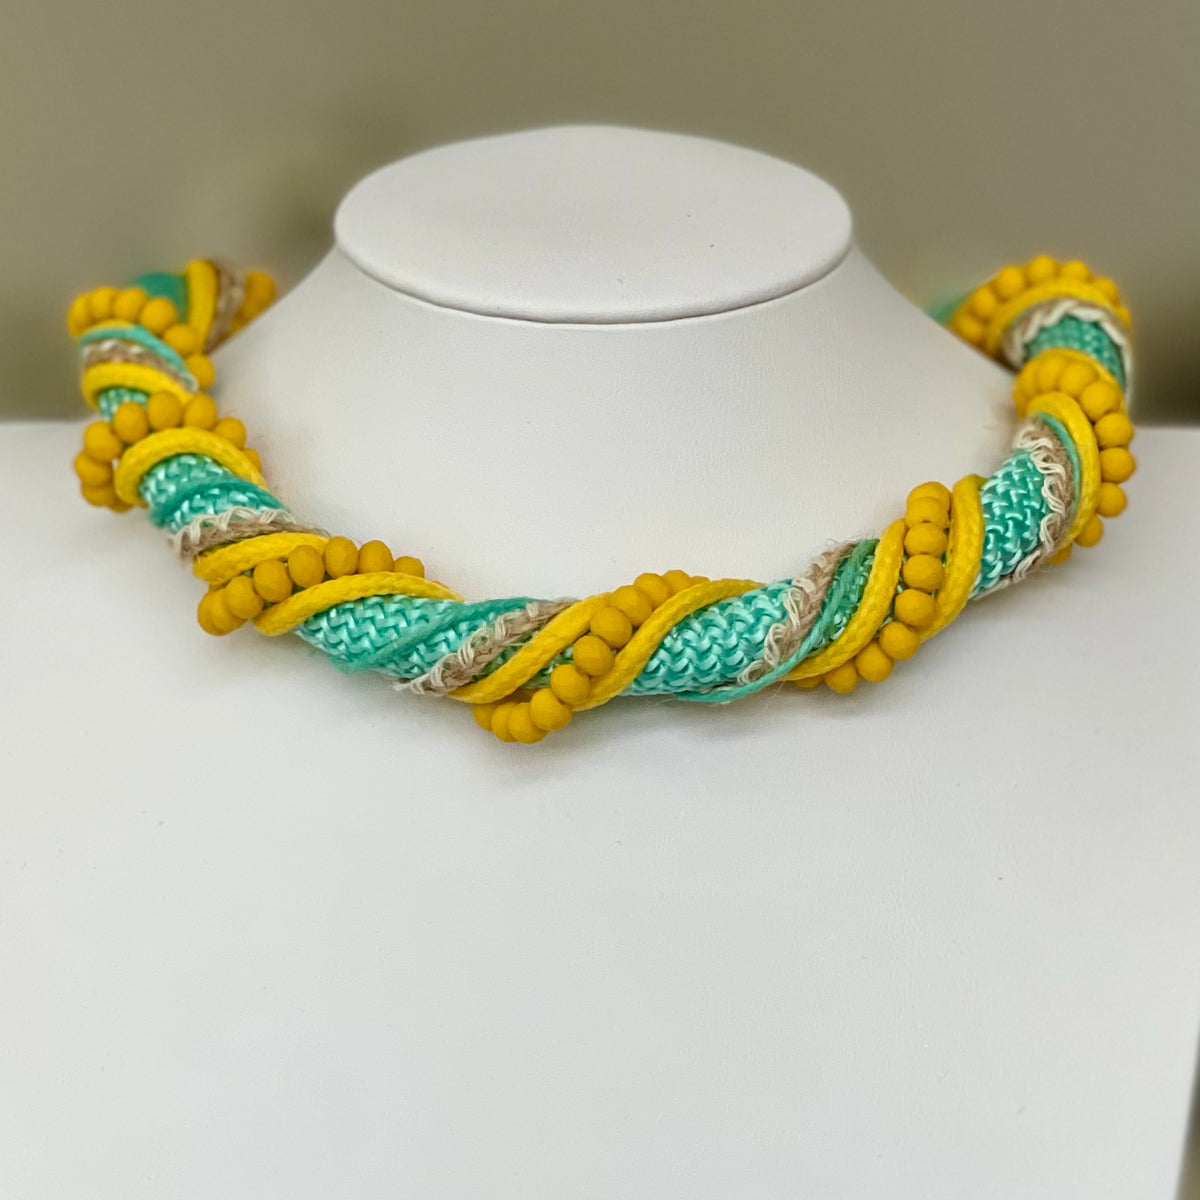 Yellow Beads and Lace Necklace - Vita Isola